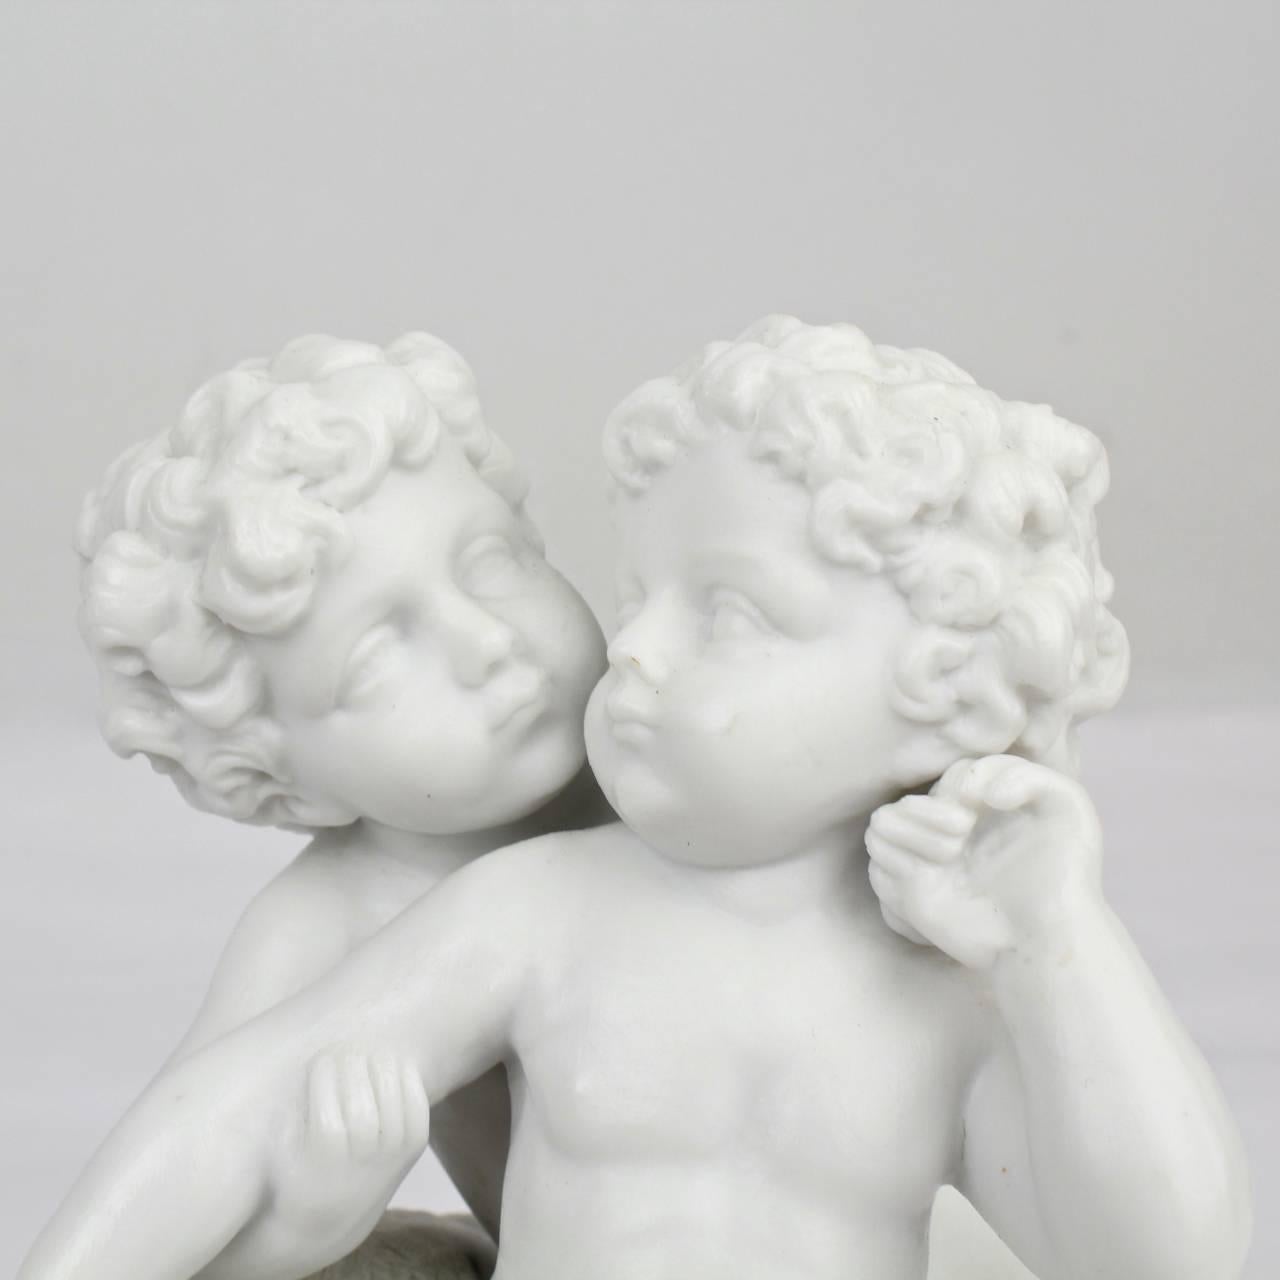 Unglazed Antique 19th Century French Bisque Figurine of Two Putti in an Amorous Embrace For Sale